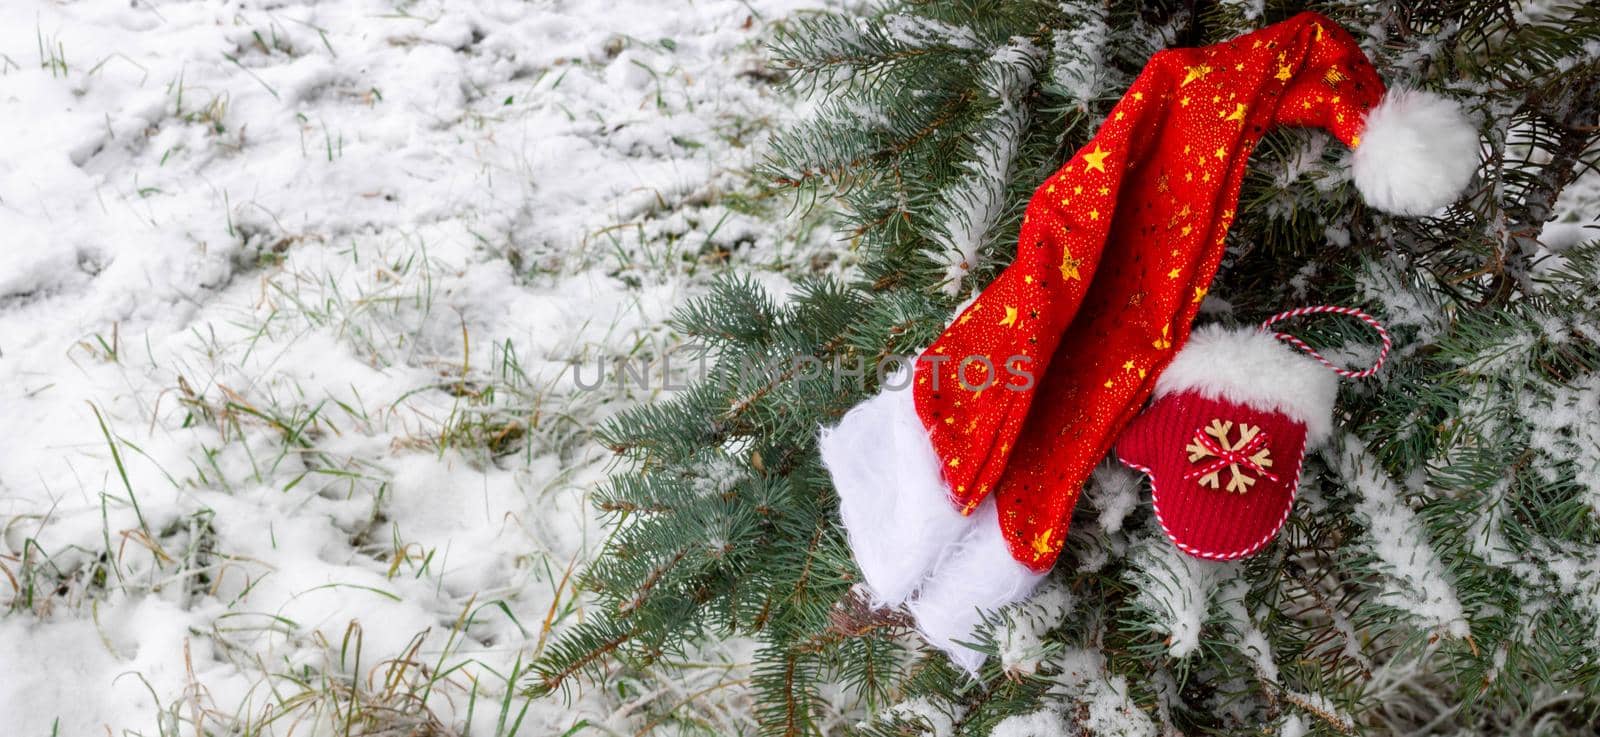 Santa Claus hat and a small red mitten lie on a snow-covered fir tree. Space for your text.